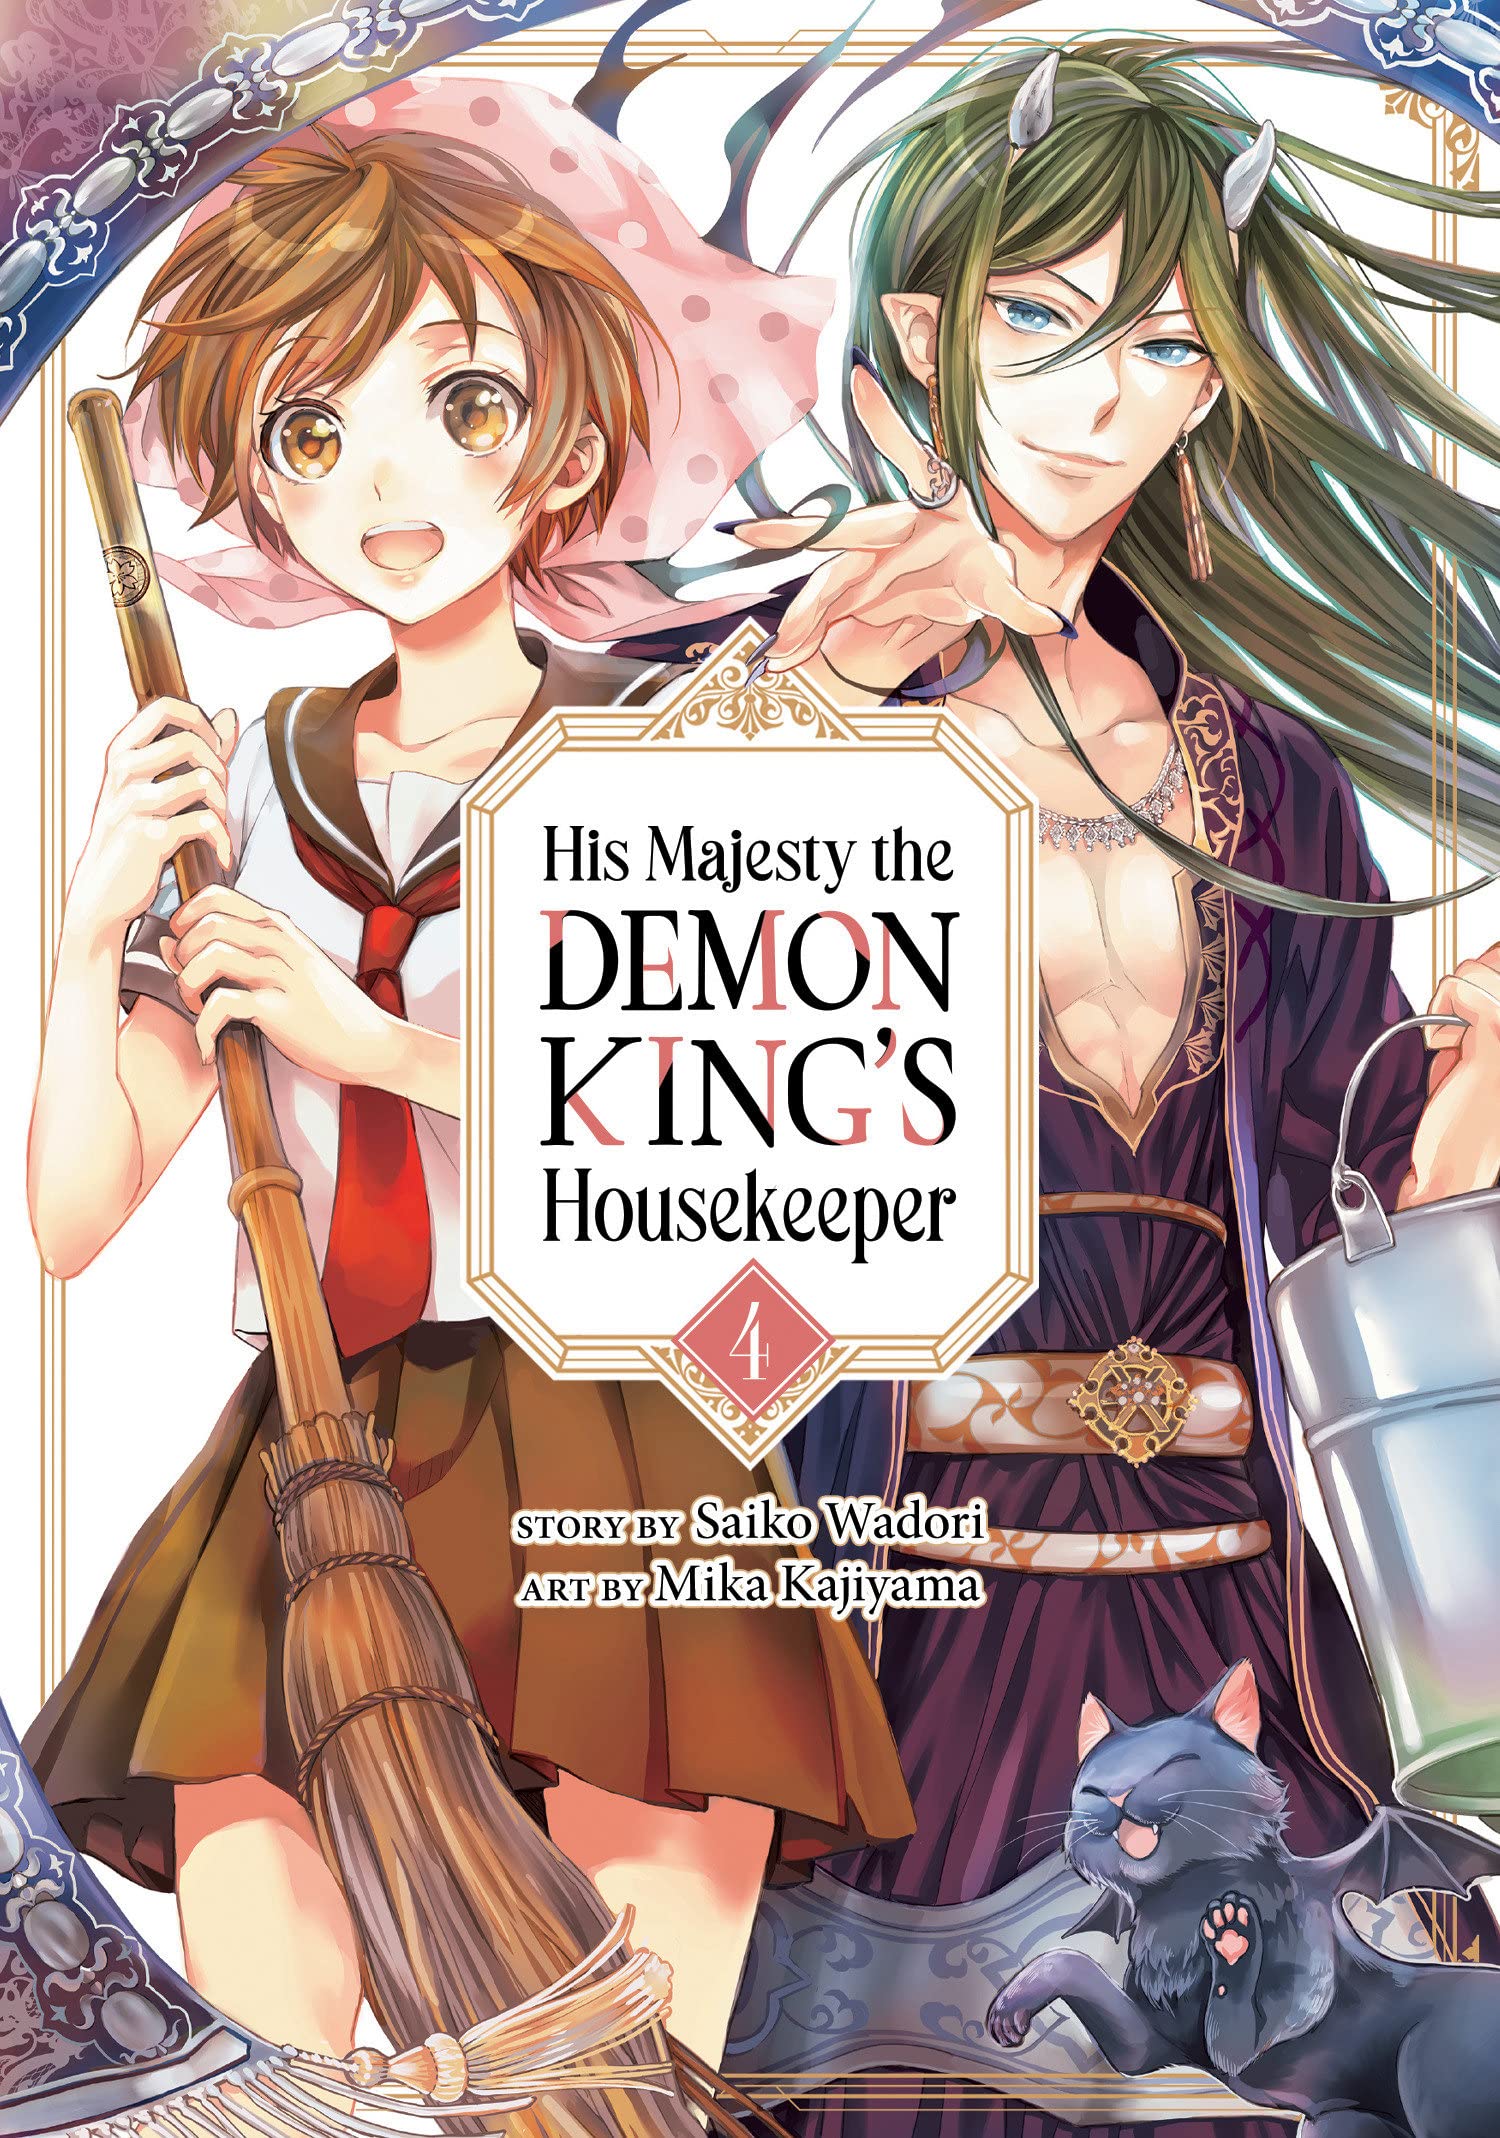 His Majesty the Demon King's Housekeeper Vol. 05